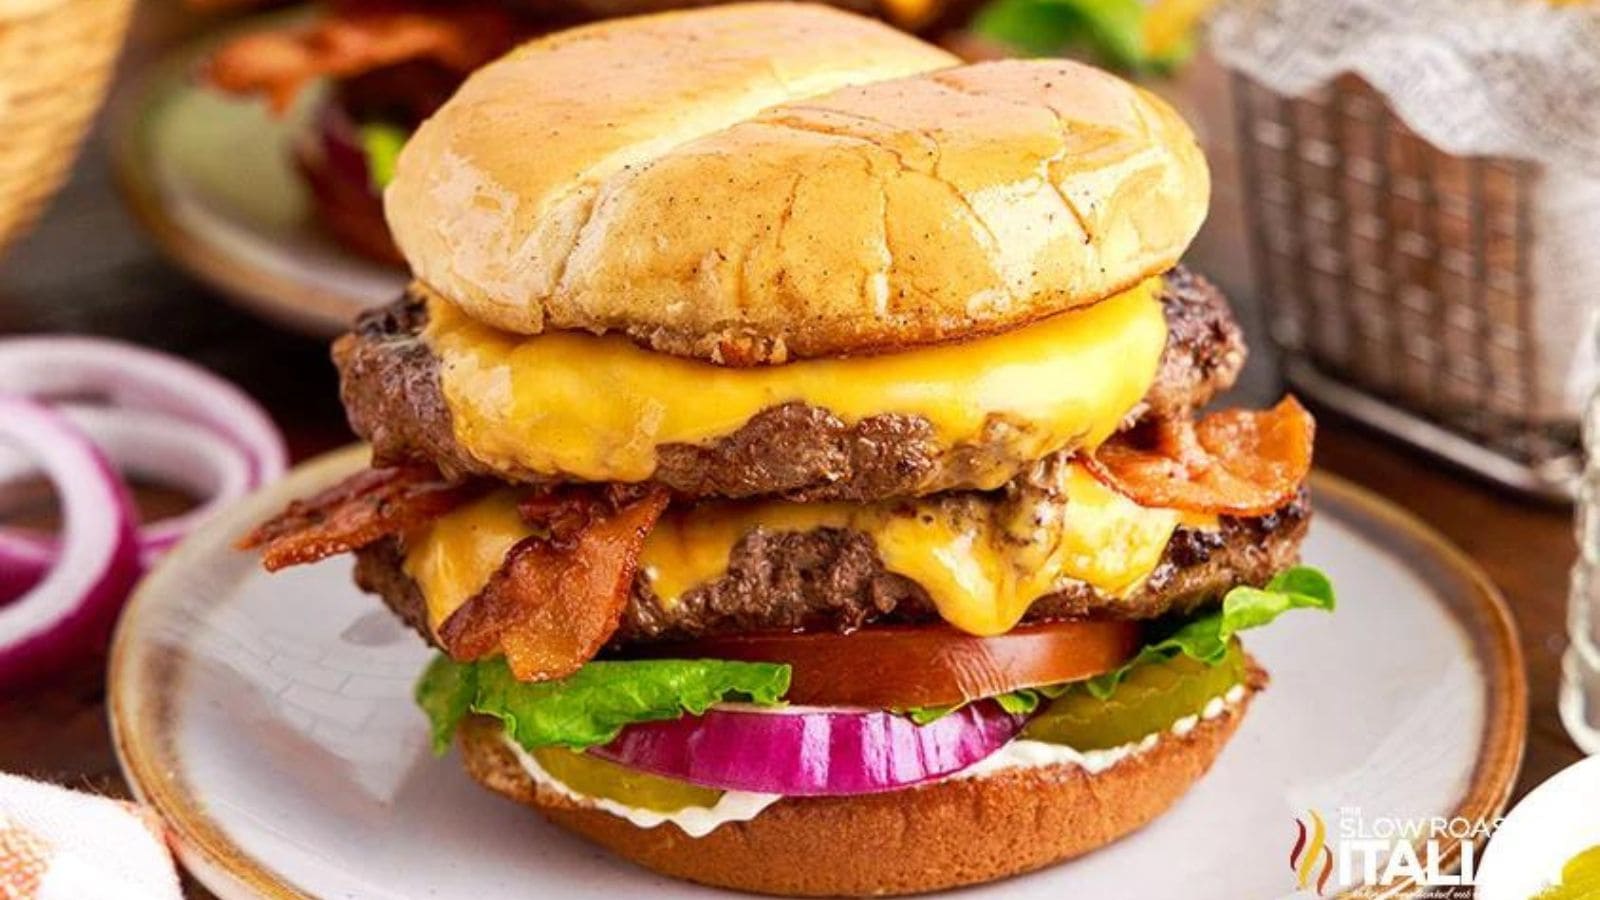 A burger with two patties, bacon and cheese.